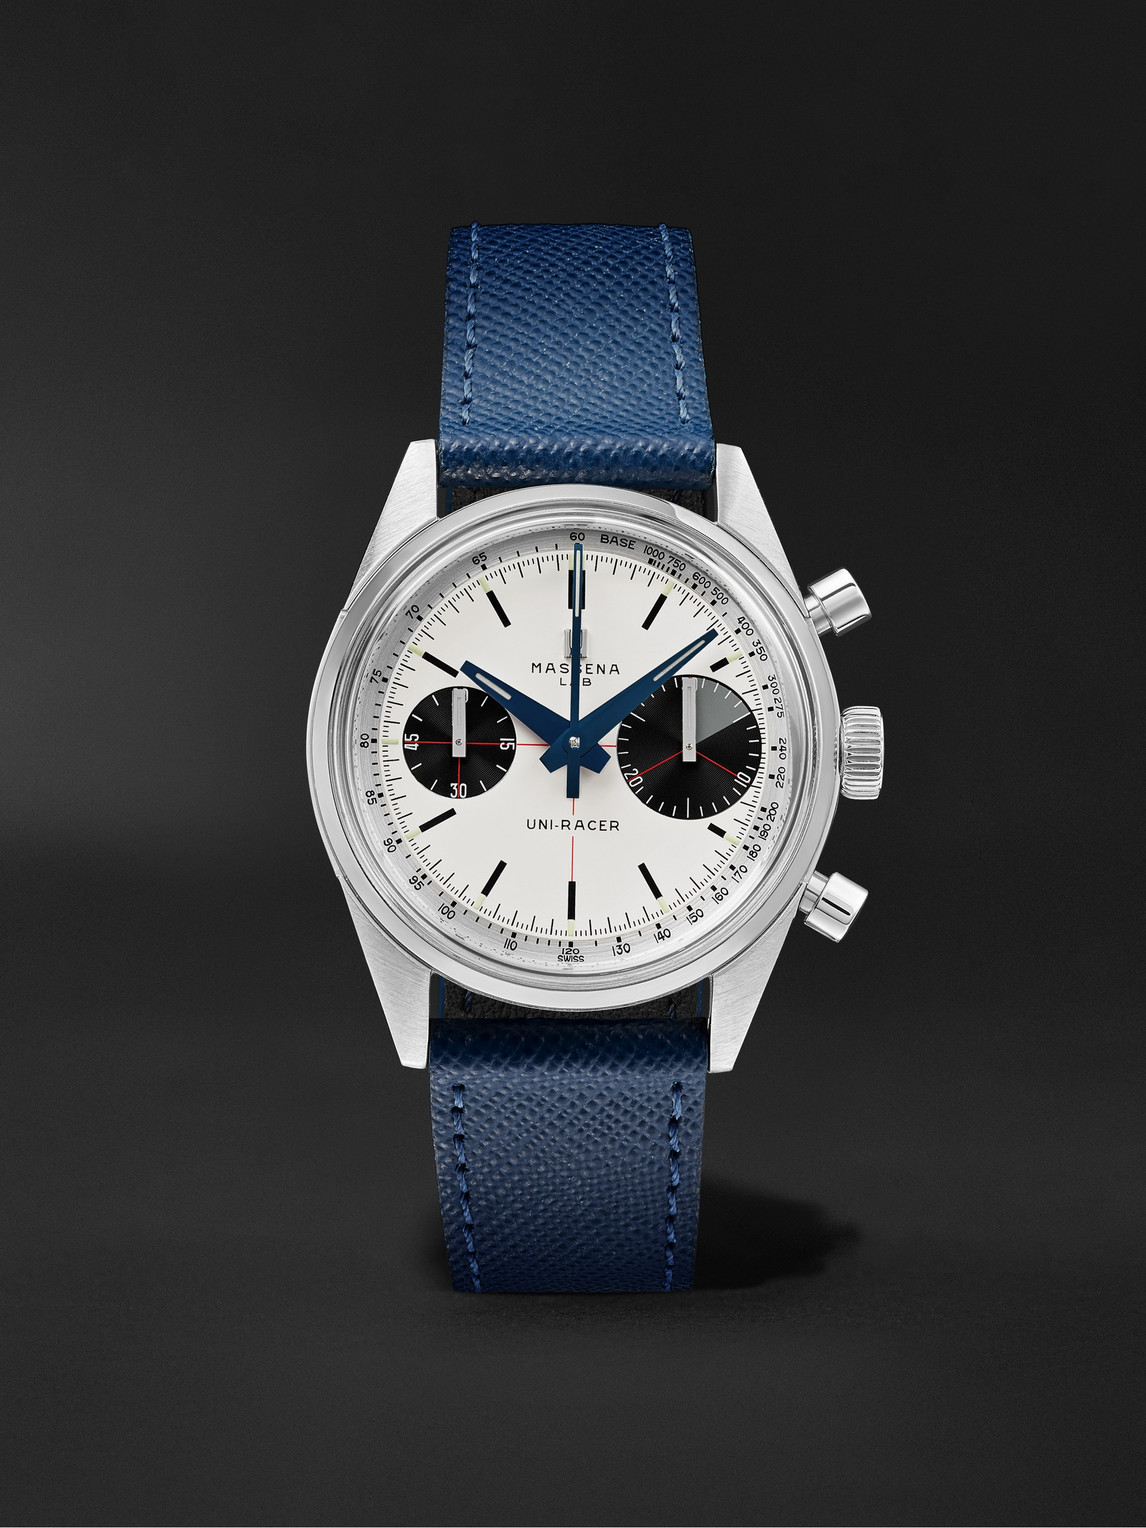 Uni-Racer Limited Edition Hand-Wound Chronograph 39mm Stainless Steel and Cross-Grain Leather Watch, Ref. No. UR-001